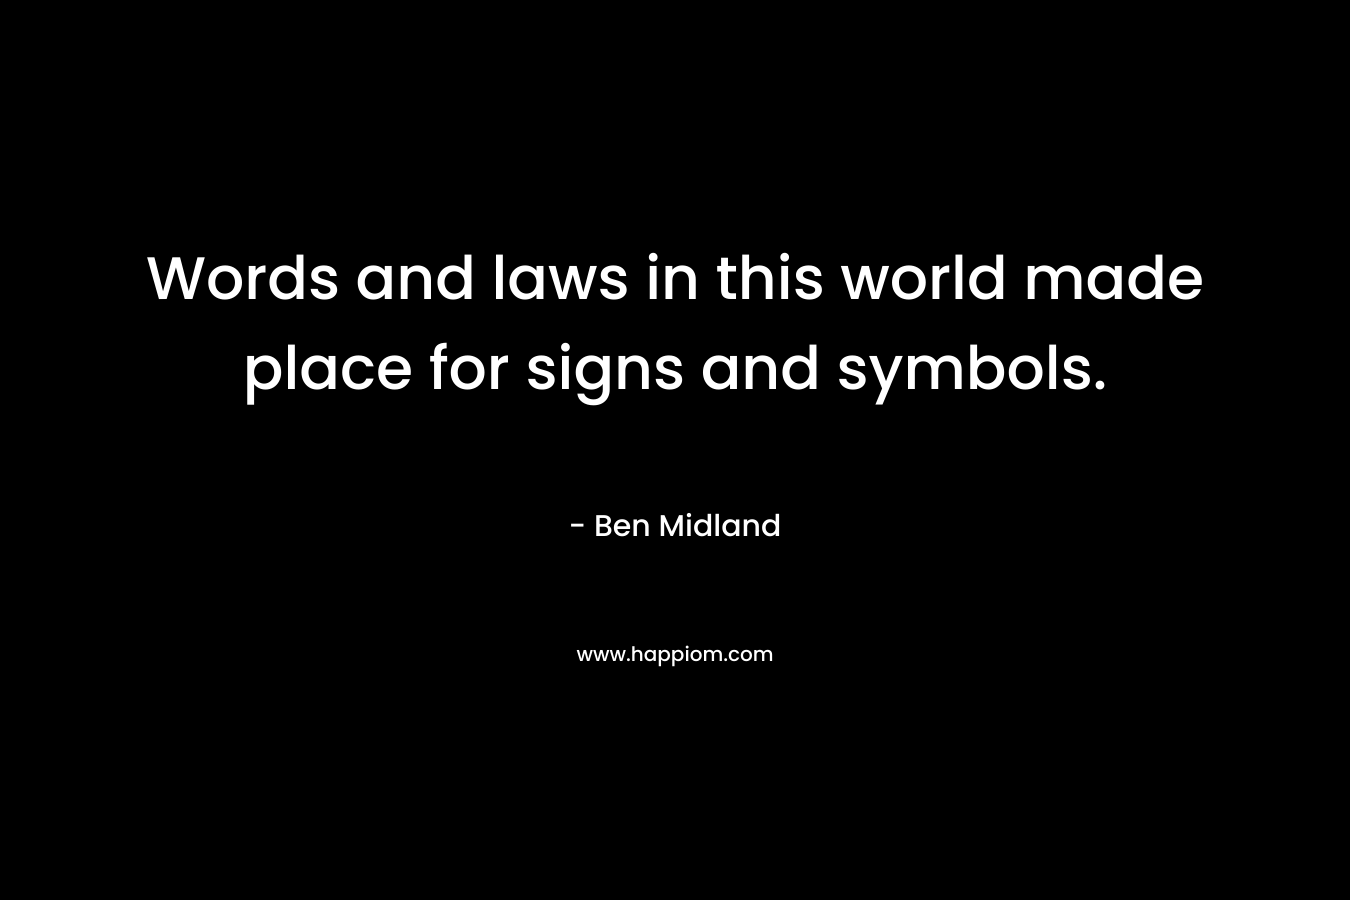 Words and laws in this world made place for signs and symbols.